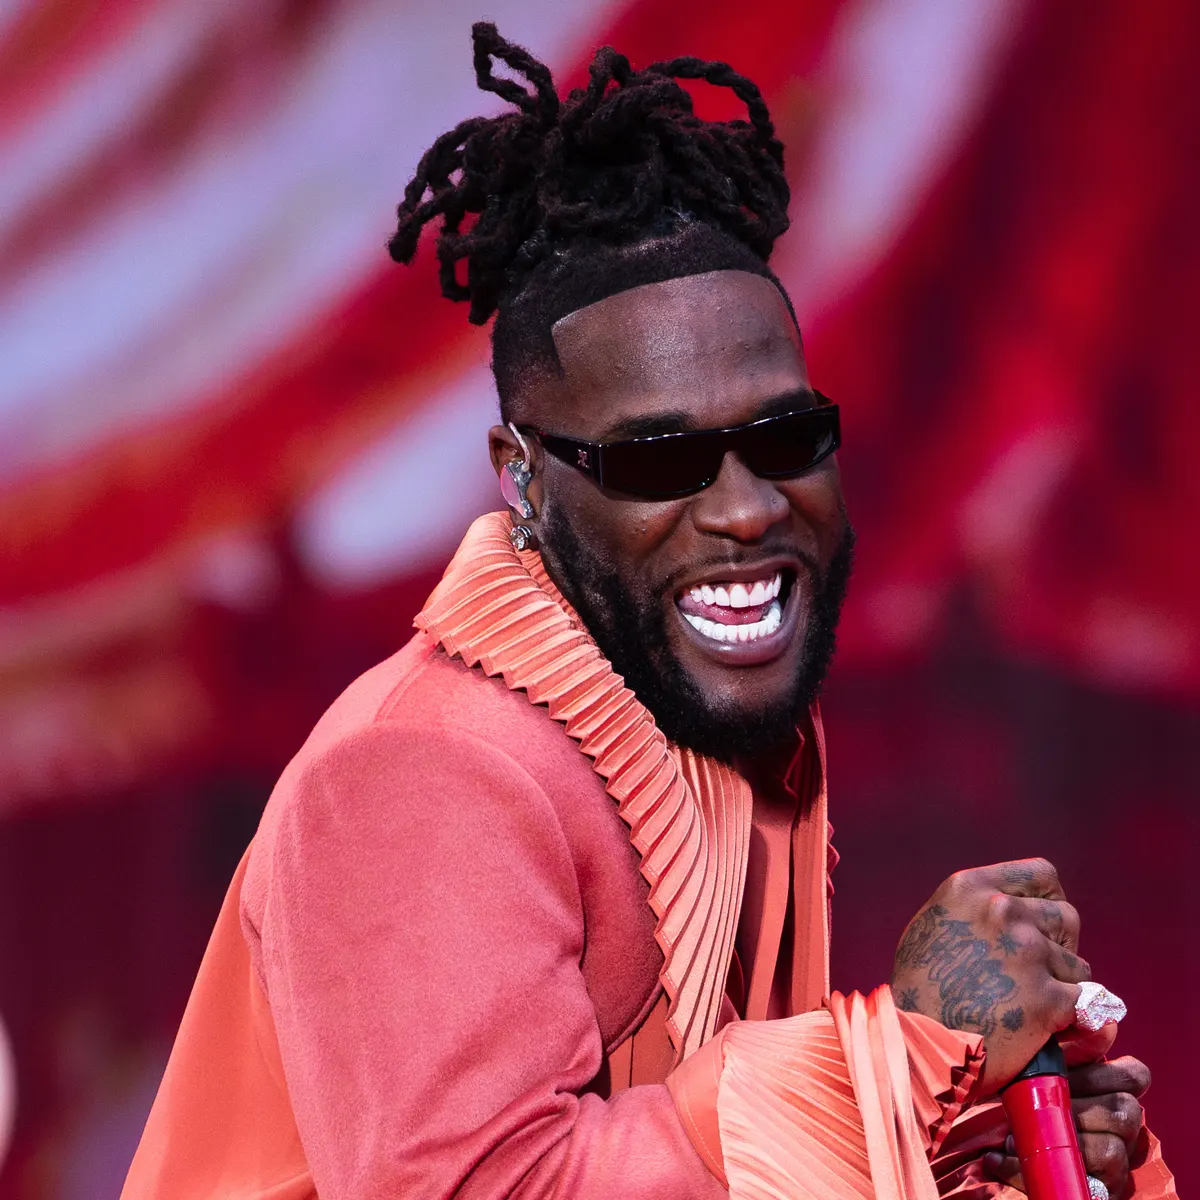 Burna Boy Makes History: First African Musician to Sell Out 41,000-Capacity Citi Field Stadium in the US